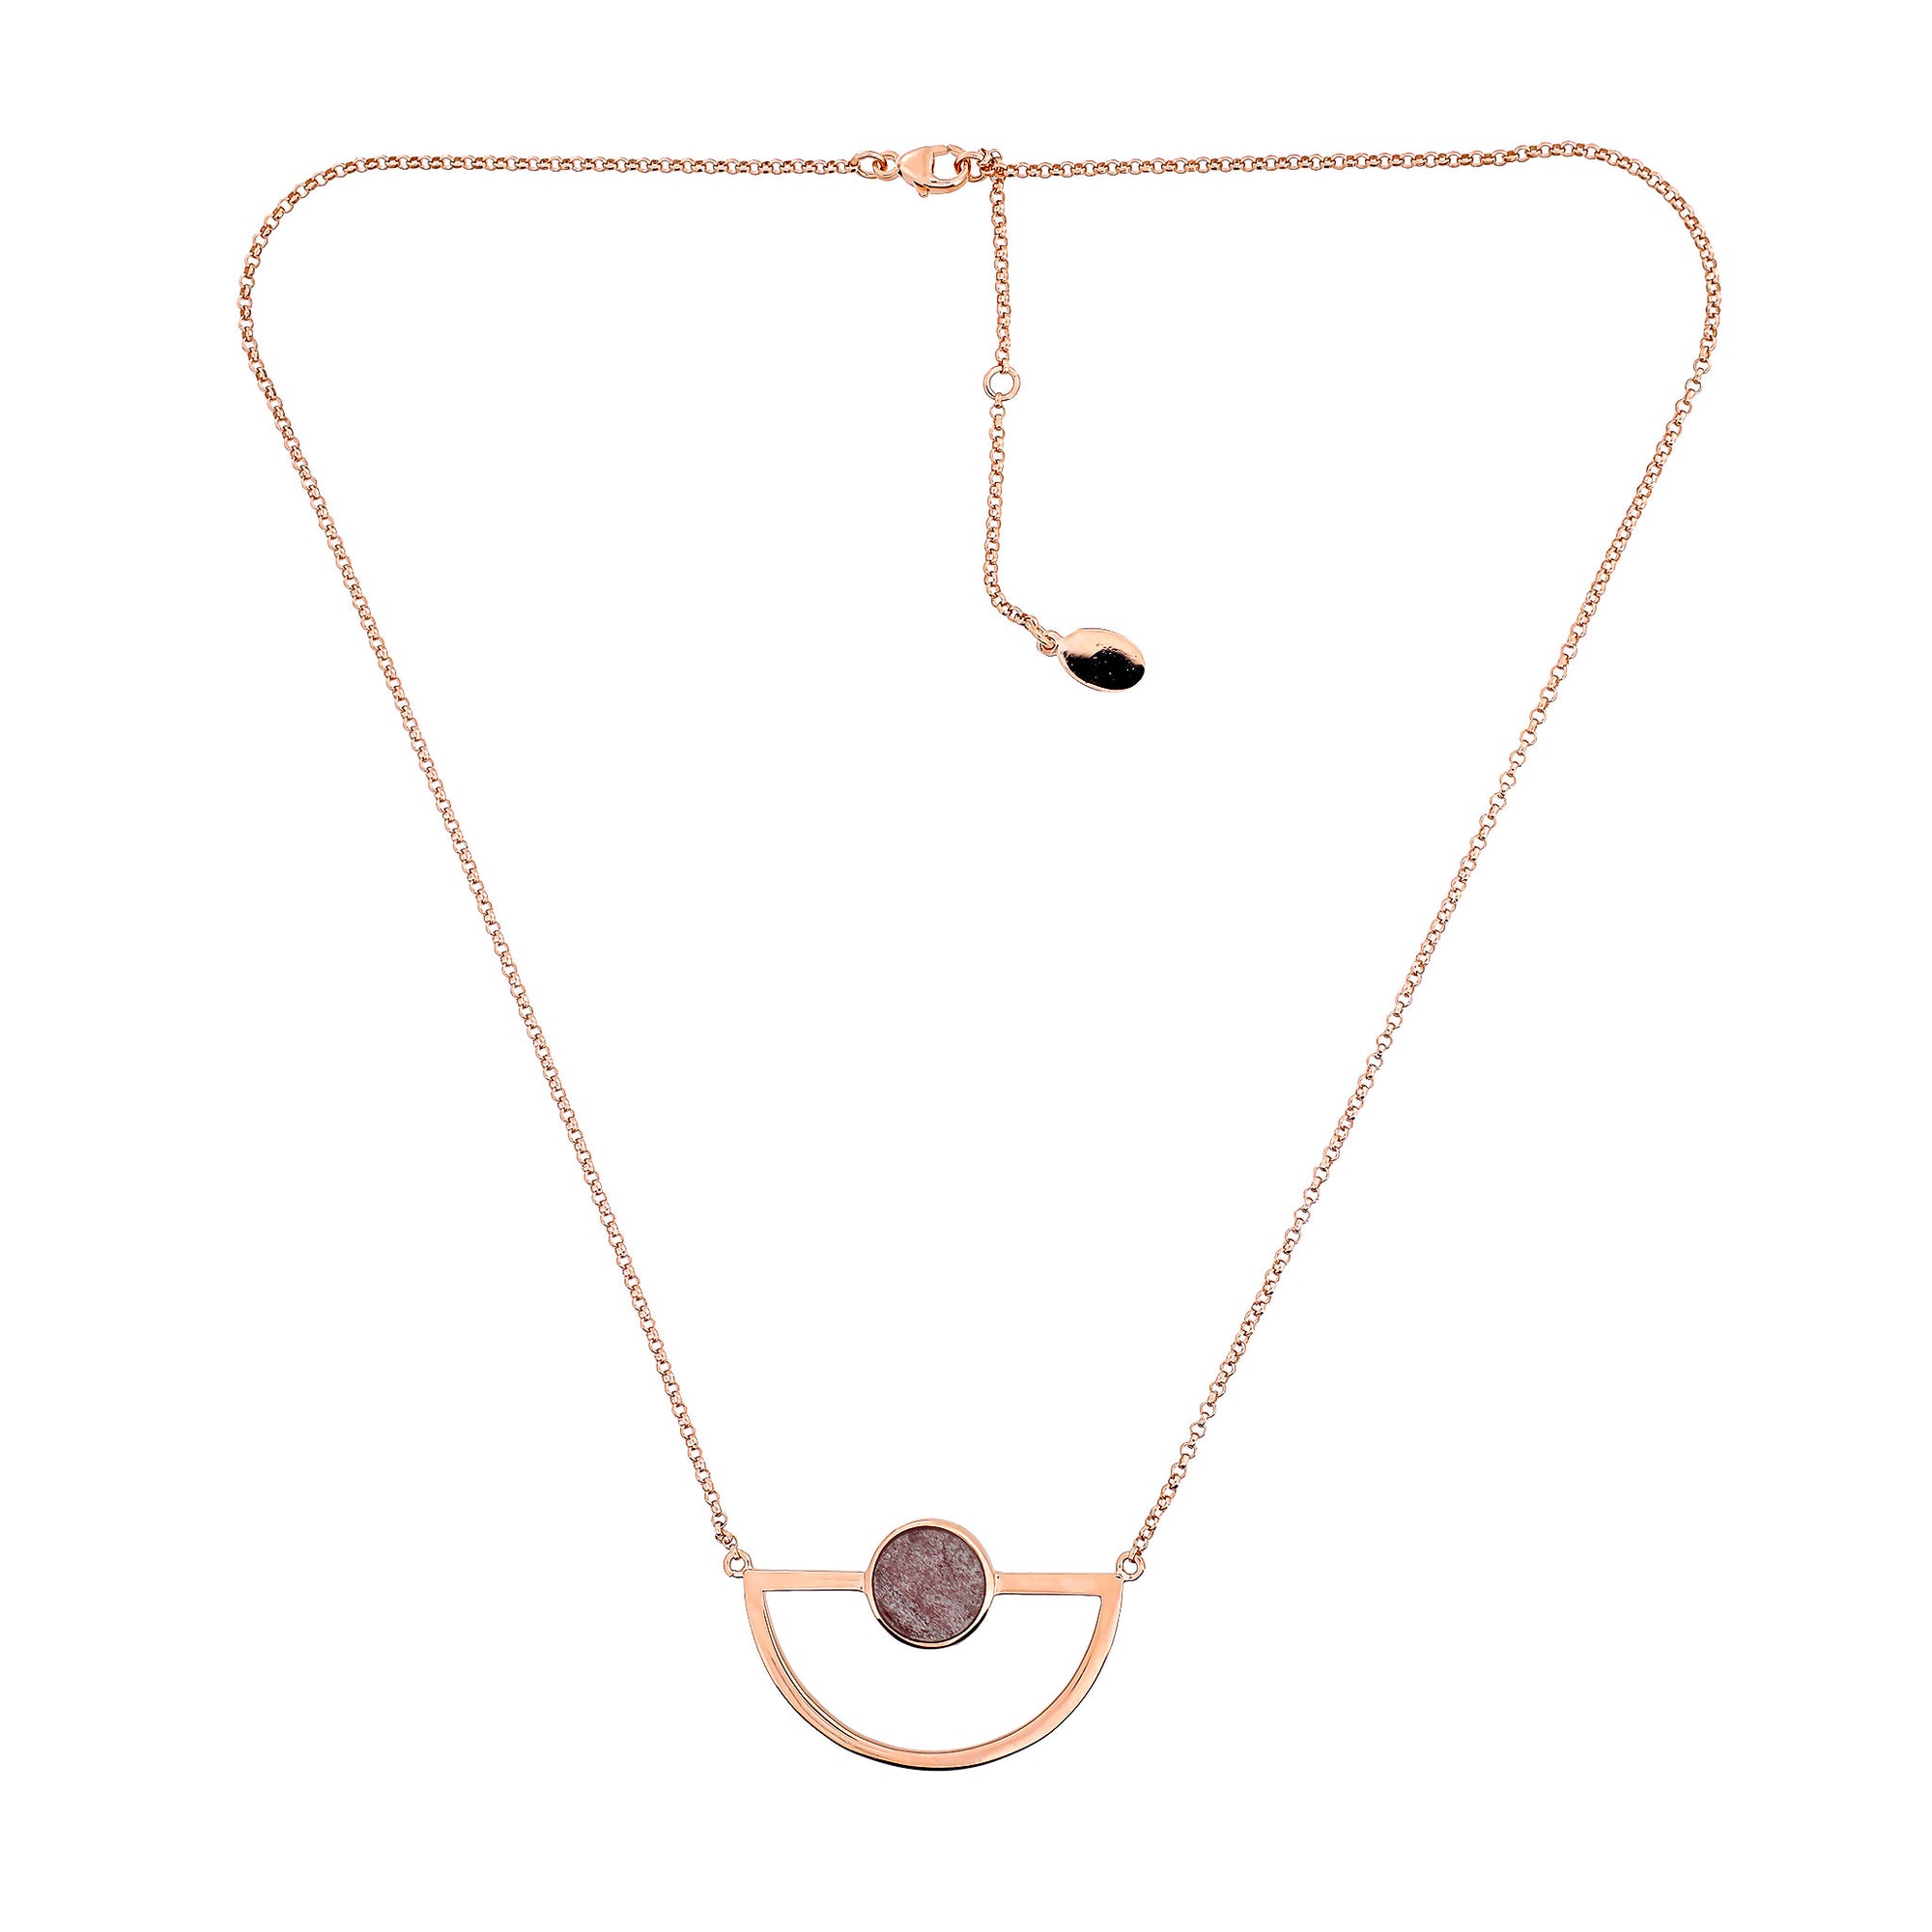 Ithica Semi-Circle Necklace with Strawberry Quartz